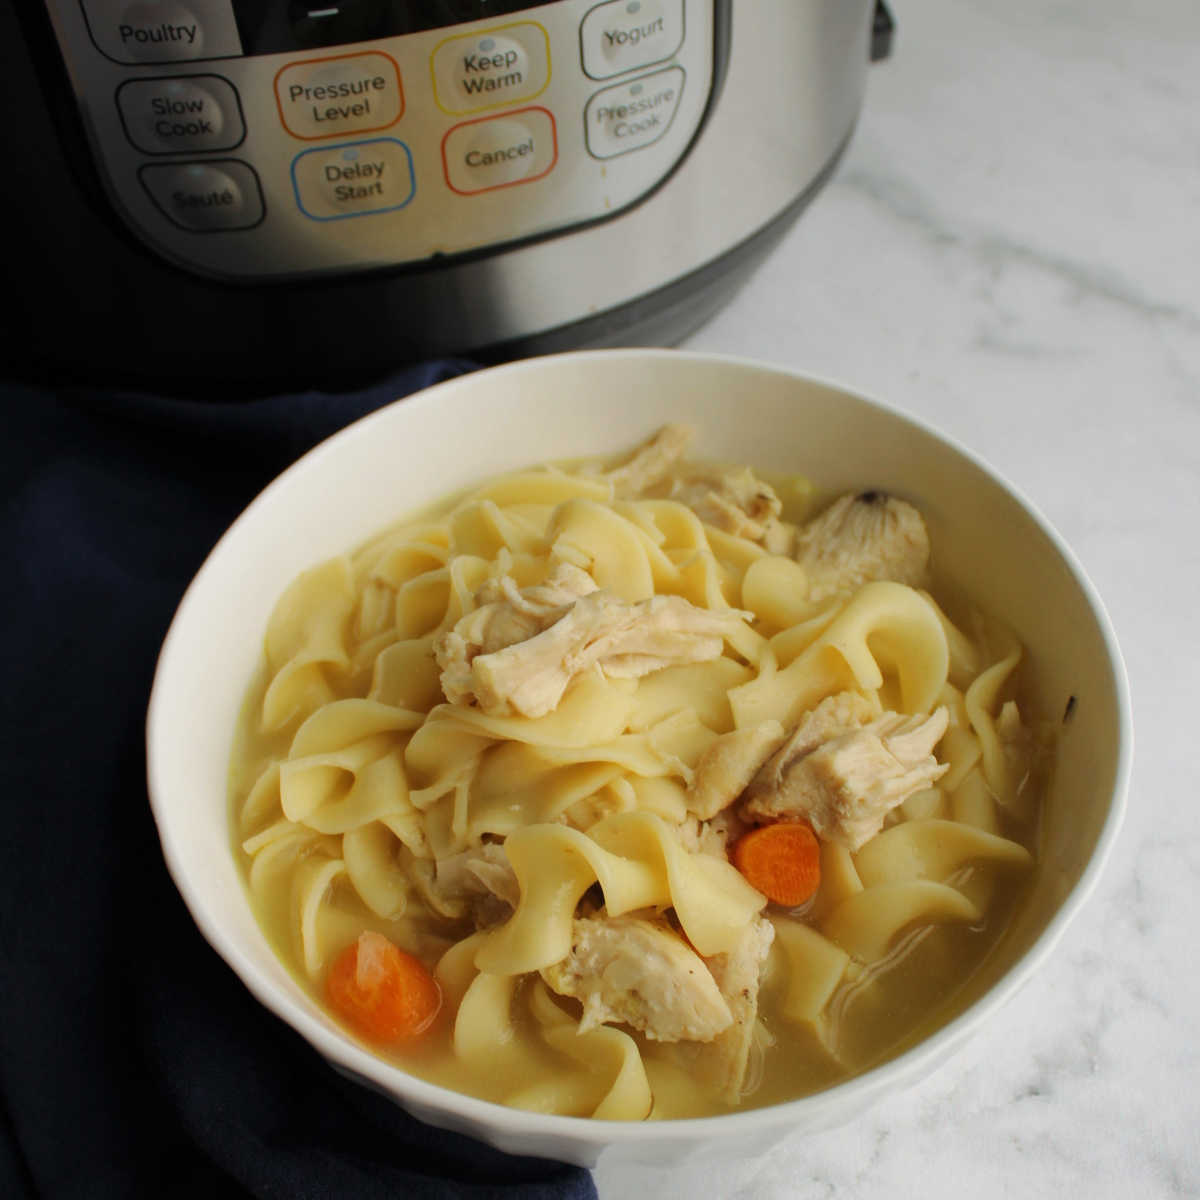 Bowl of homemade chicken noodle soup in front of instant pot.